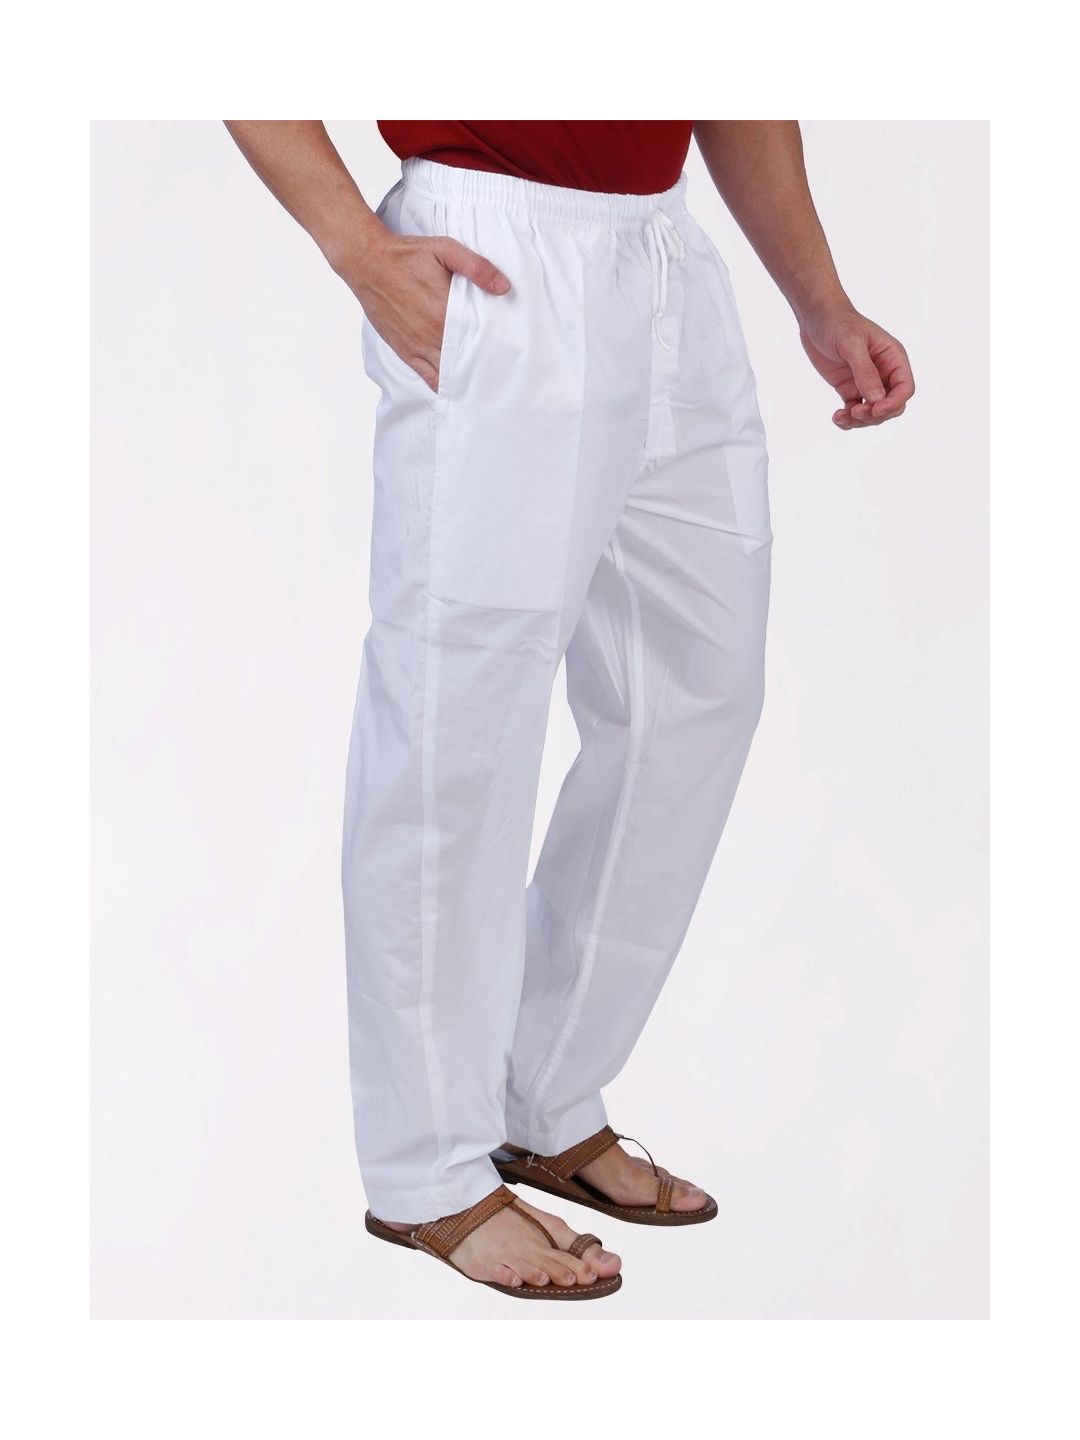 Men's Off-White Indian Pajama Pants - Solid Straight Cut | In-Sattva